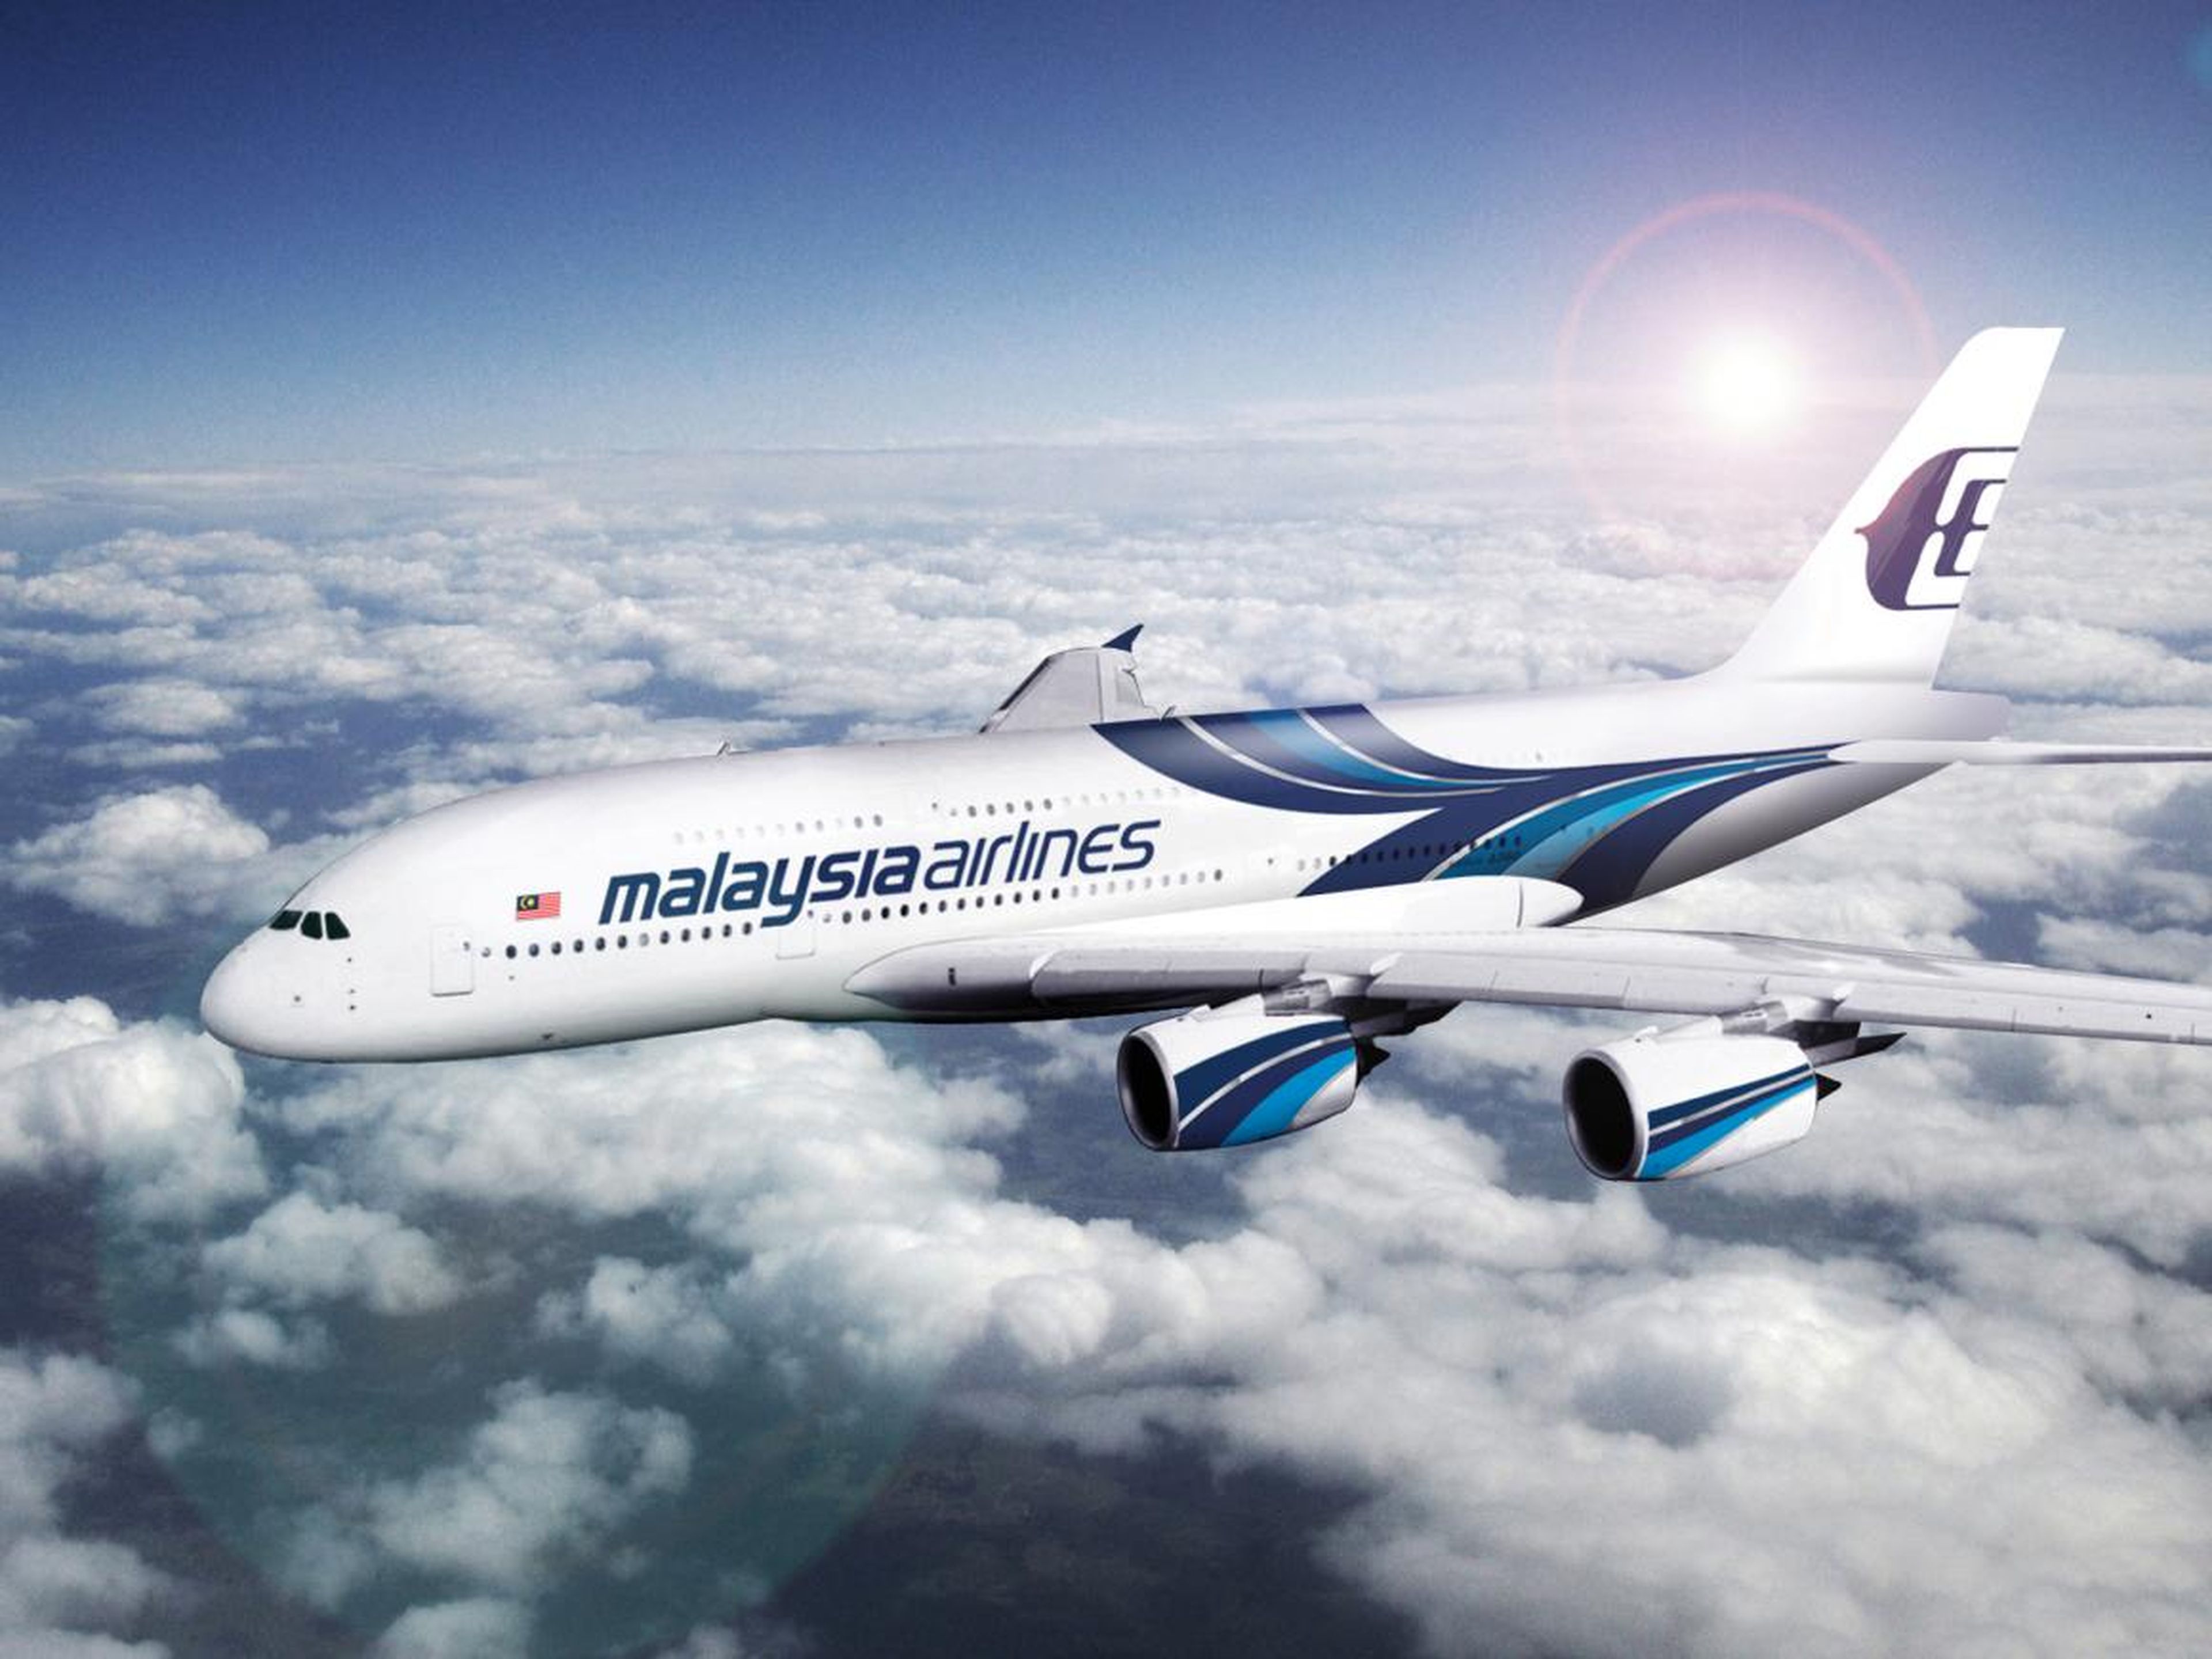 ... Malaysia Airlines ...